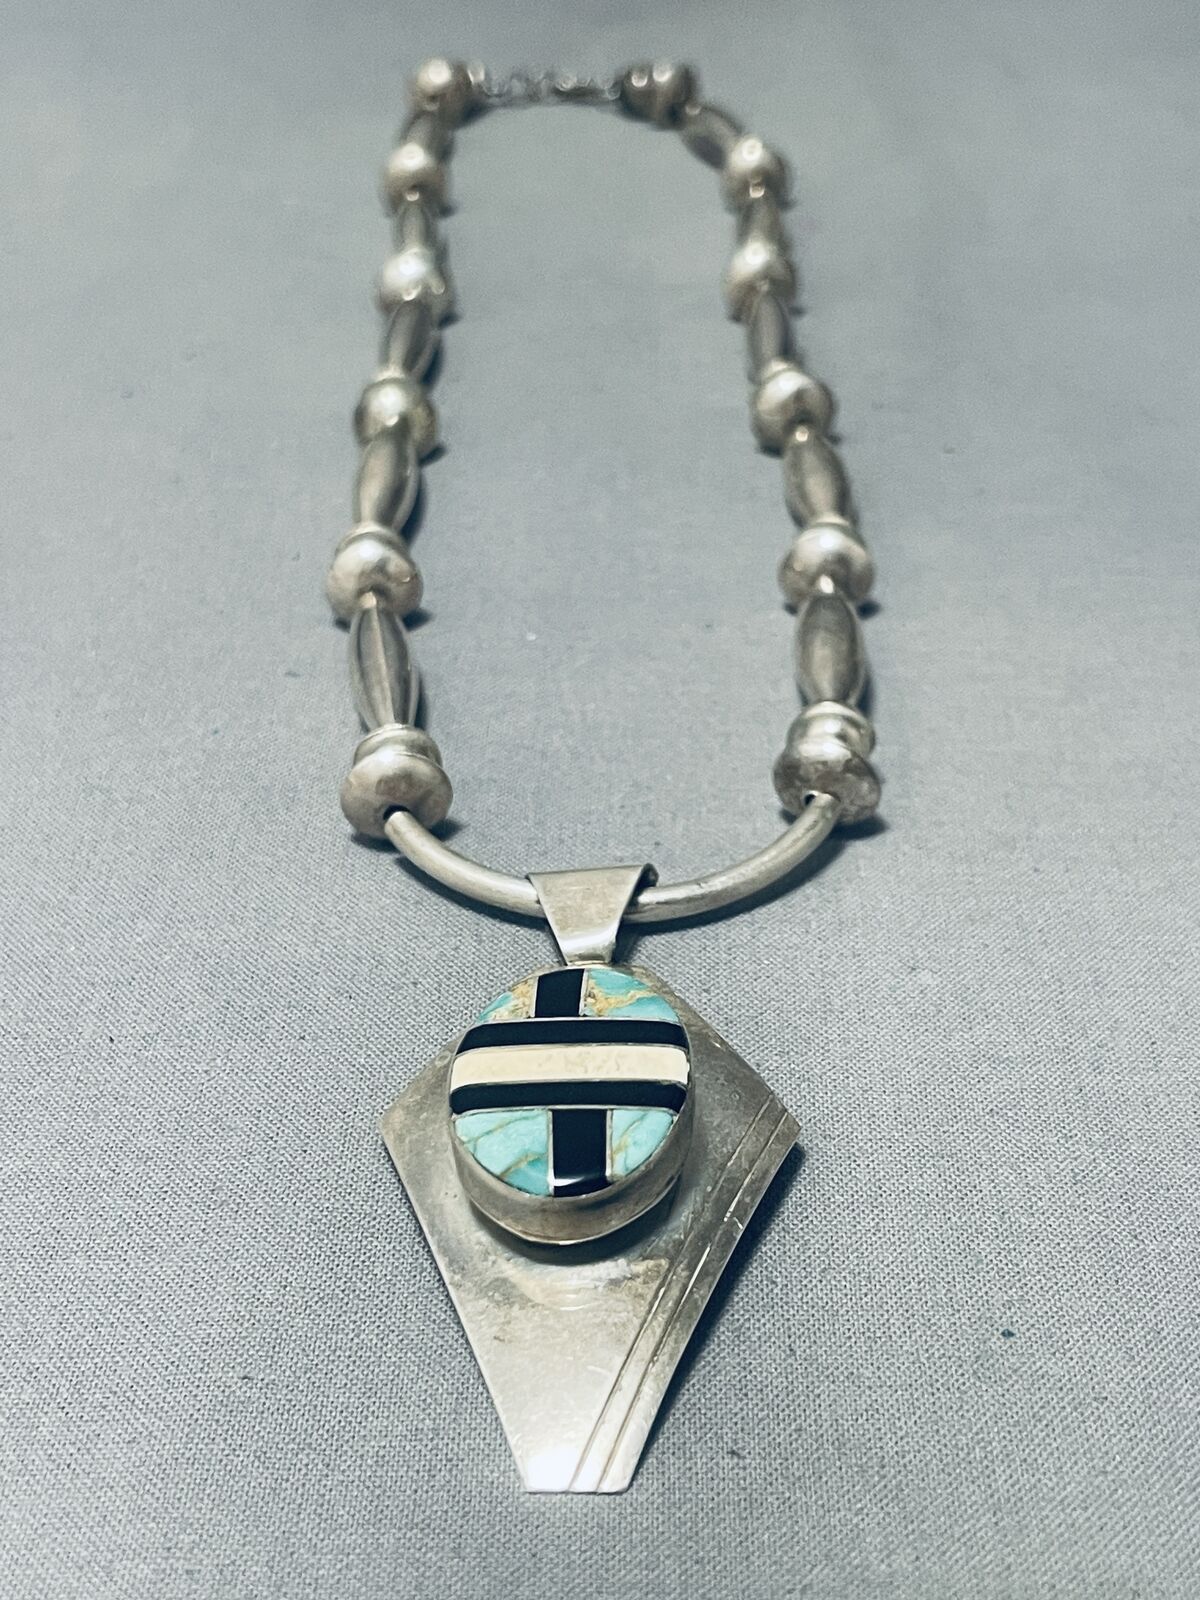 DROPDEAD GORGEOUS VINTAGE NAVAJO TURQUOISE INLAY STERLING SILVER NECKLACE